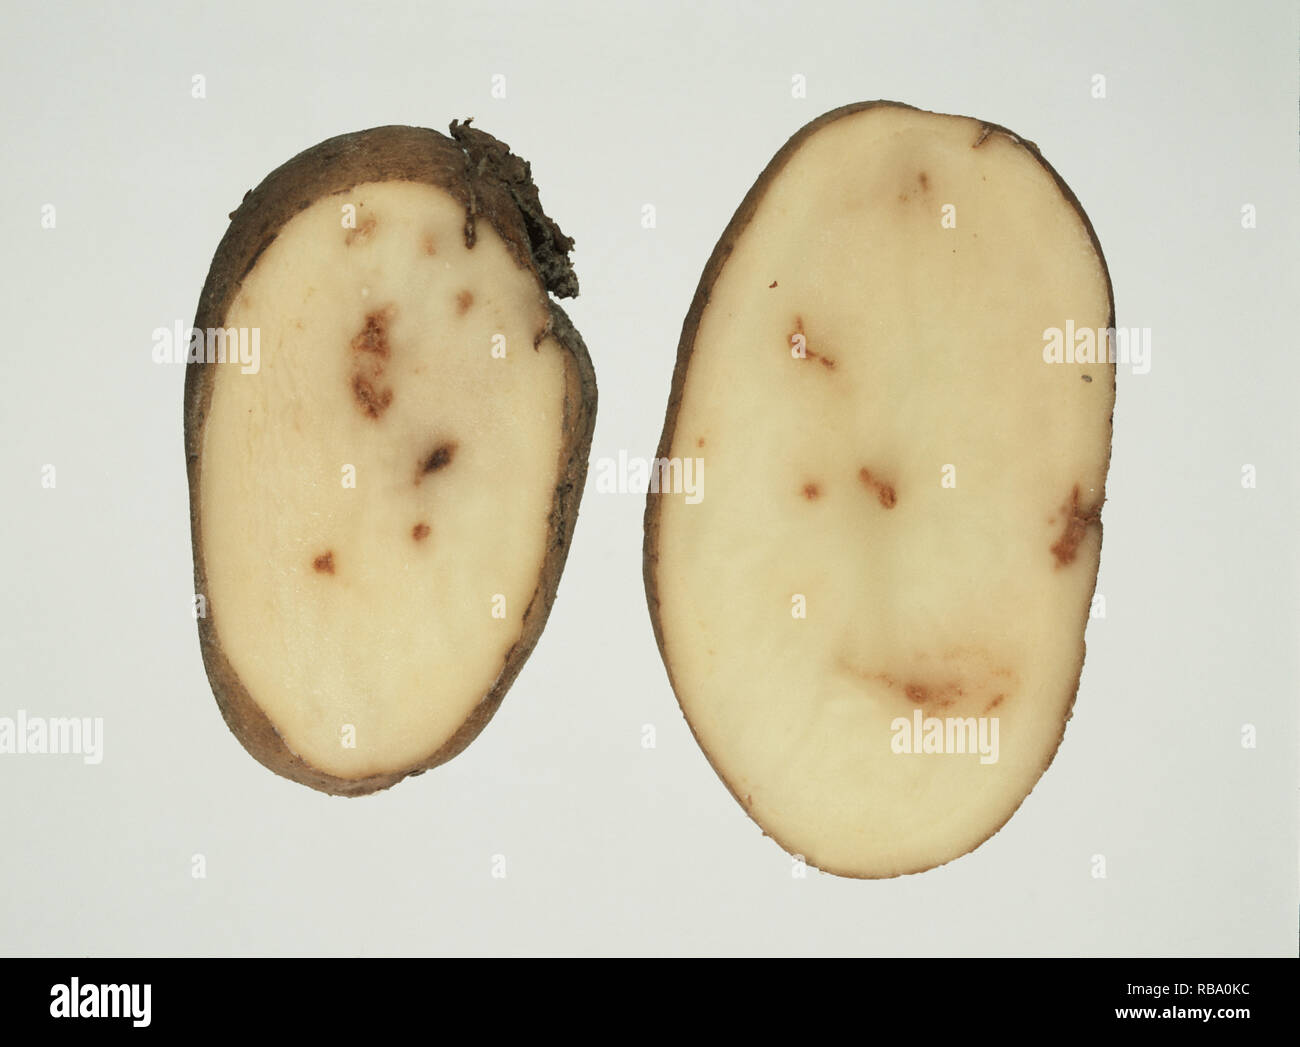 Internal rust spot evident in potato tuber cross-section, IRS is a physiological disorder in potatoes (Solanum tuberosum) Stock Photo